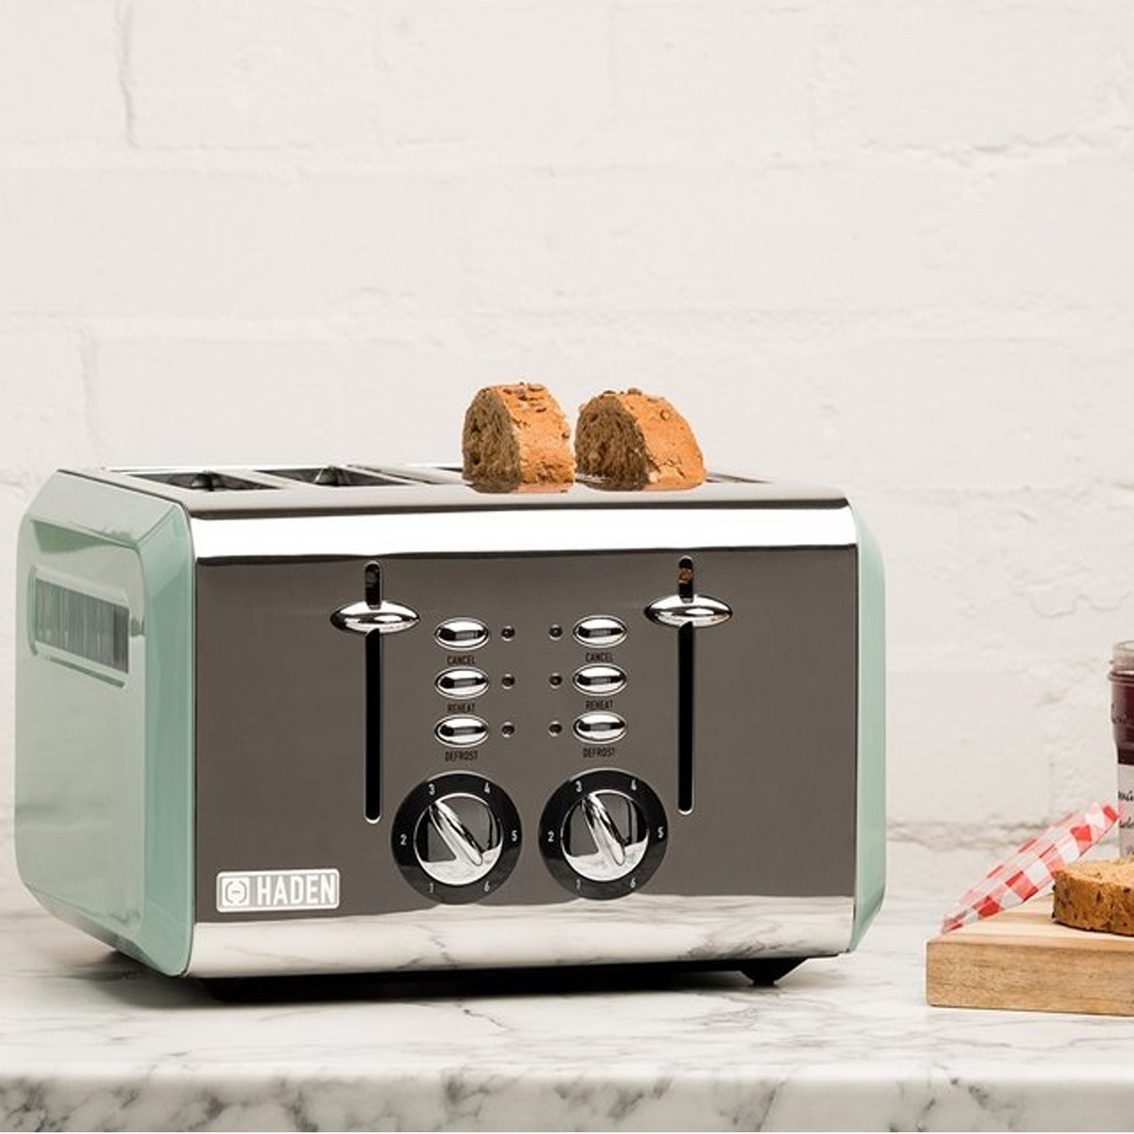 Haden Cotswold 4 Slice Stainless Steel Toaster - Image 5 of 5